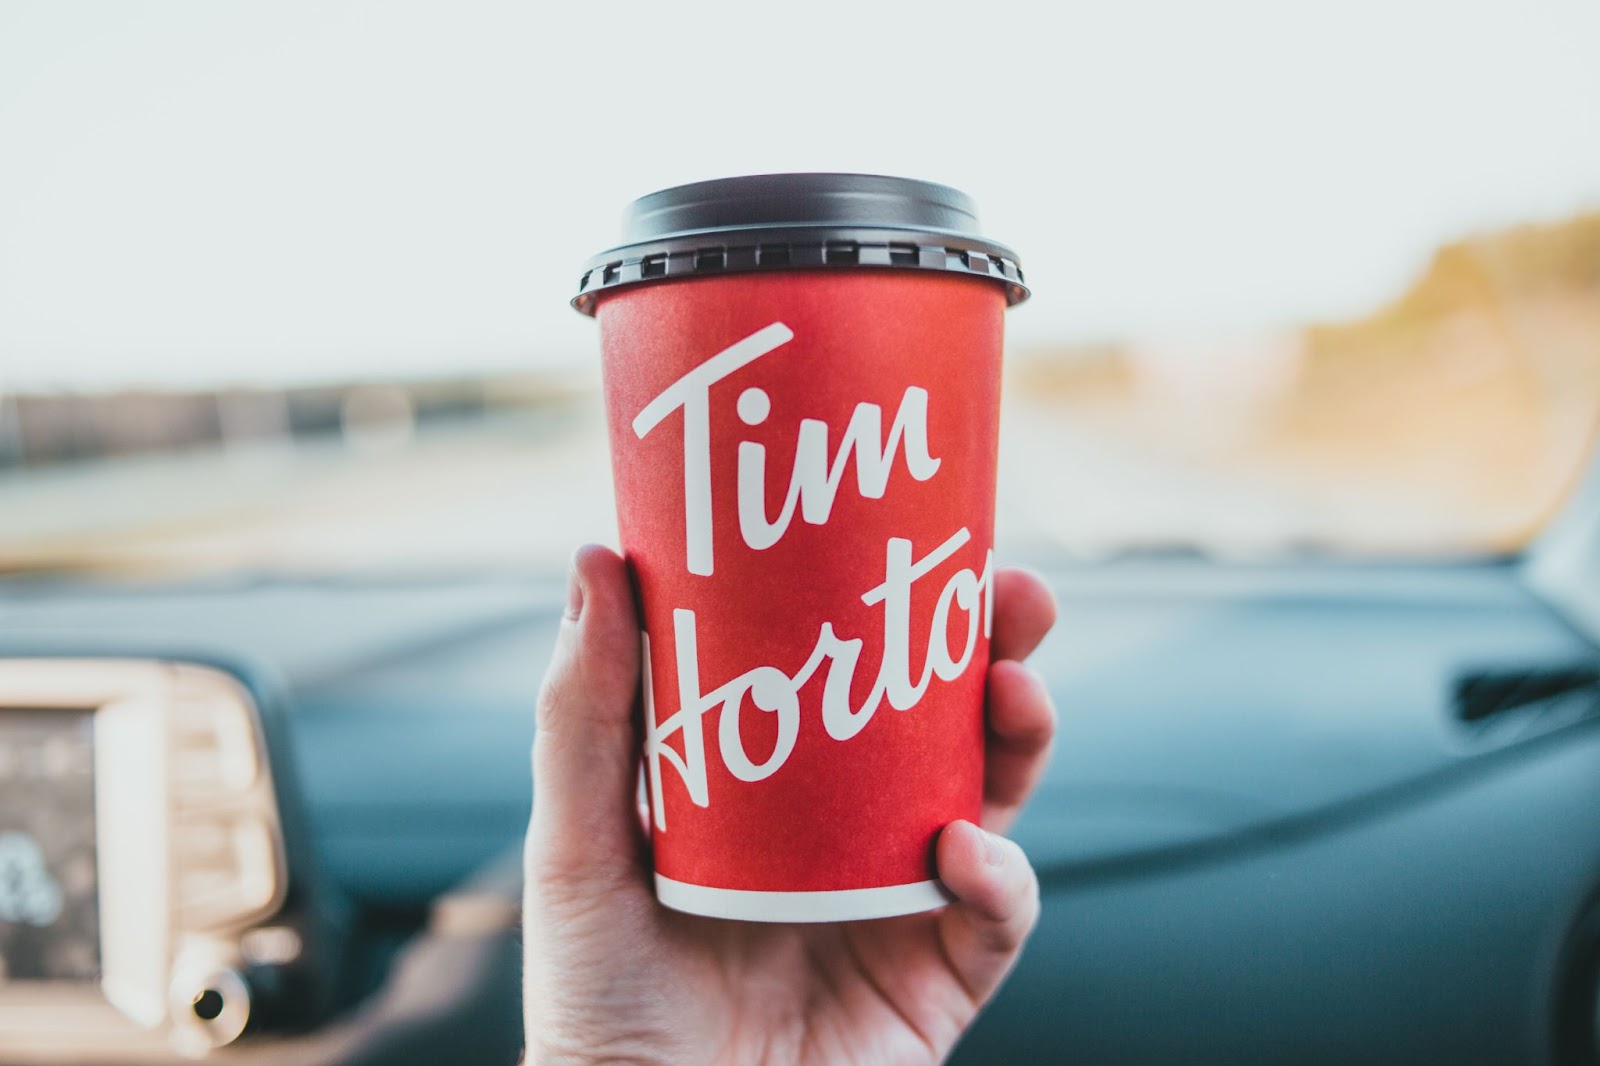 a hand holding a Tim Hortons red cup, with a car dashboard in the background.